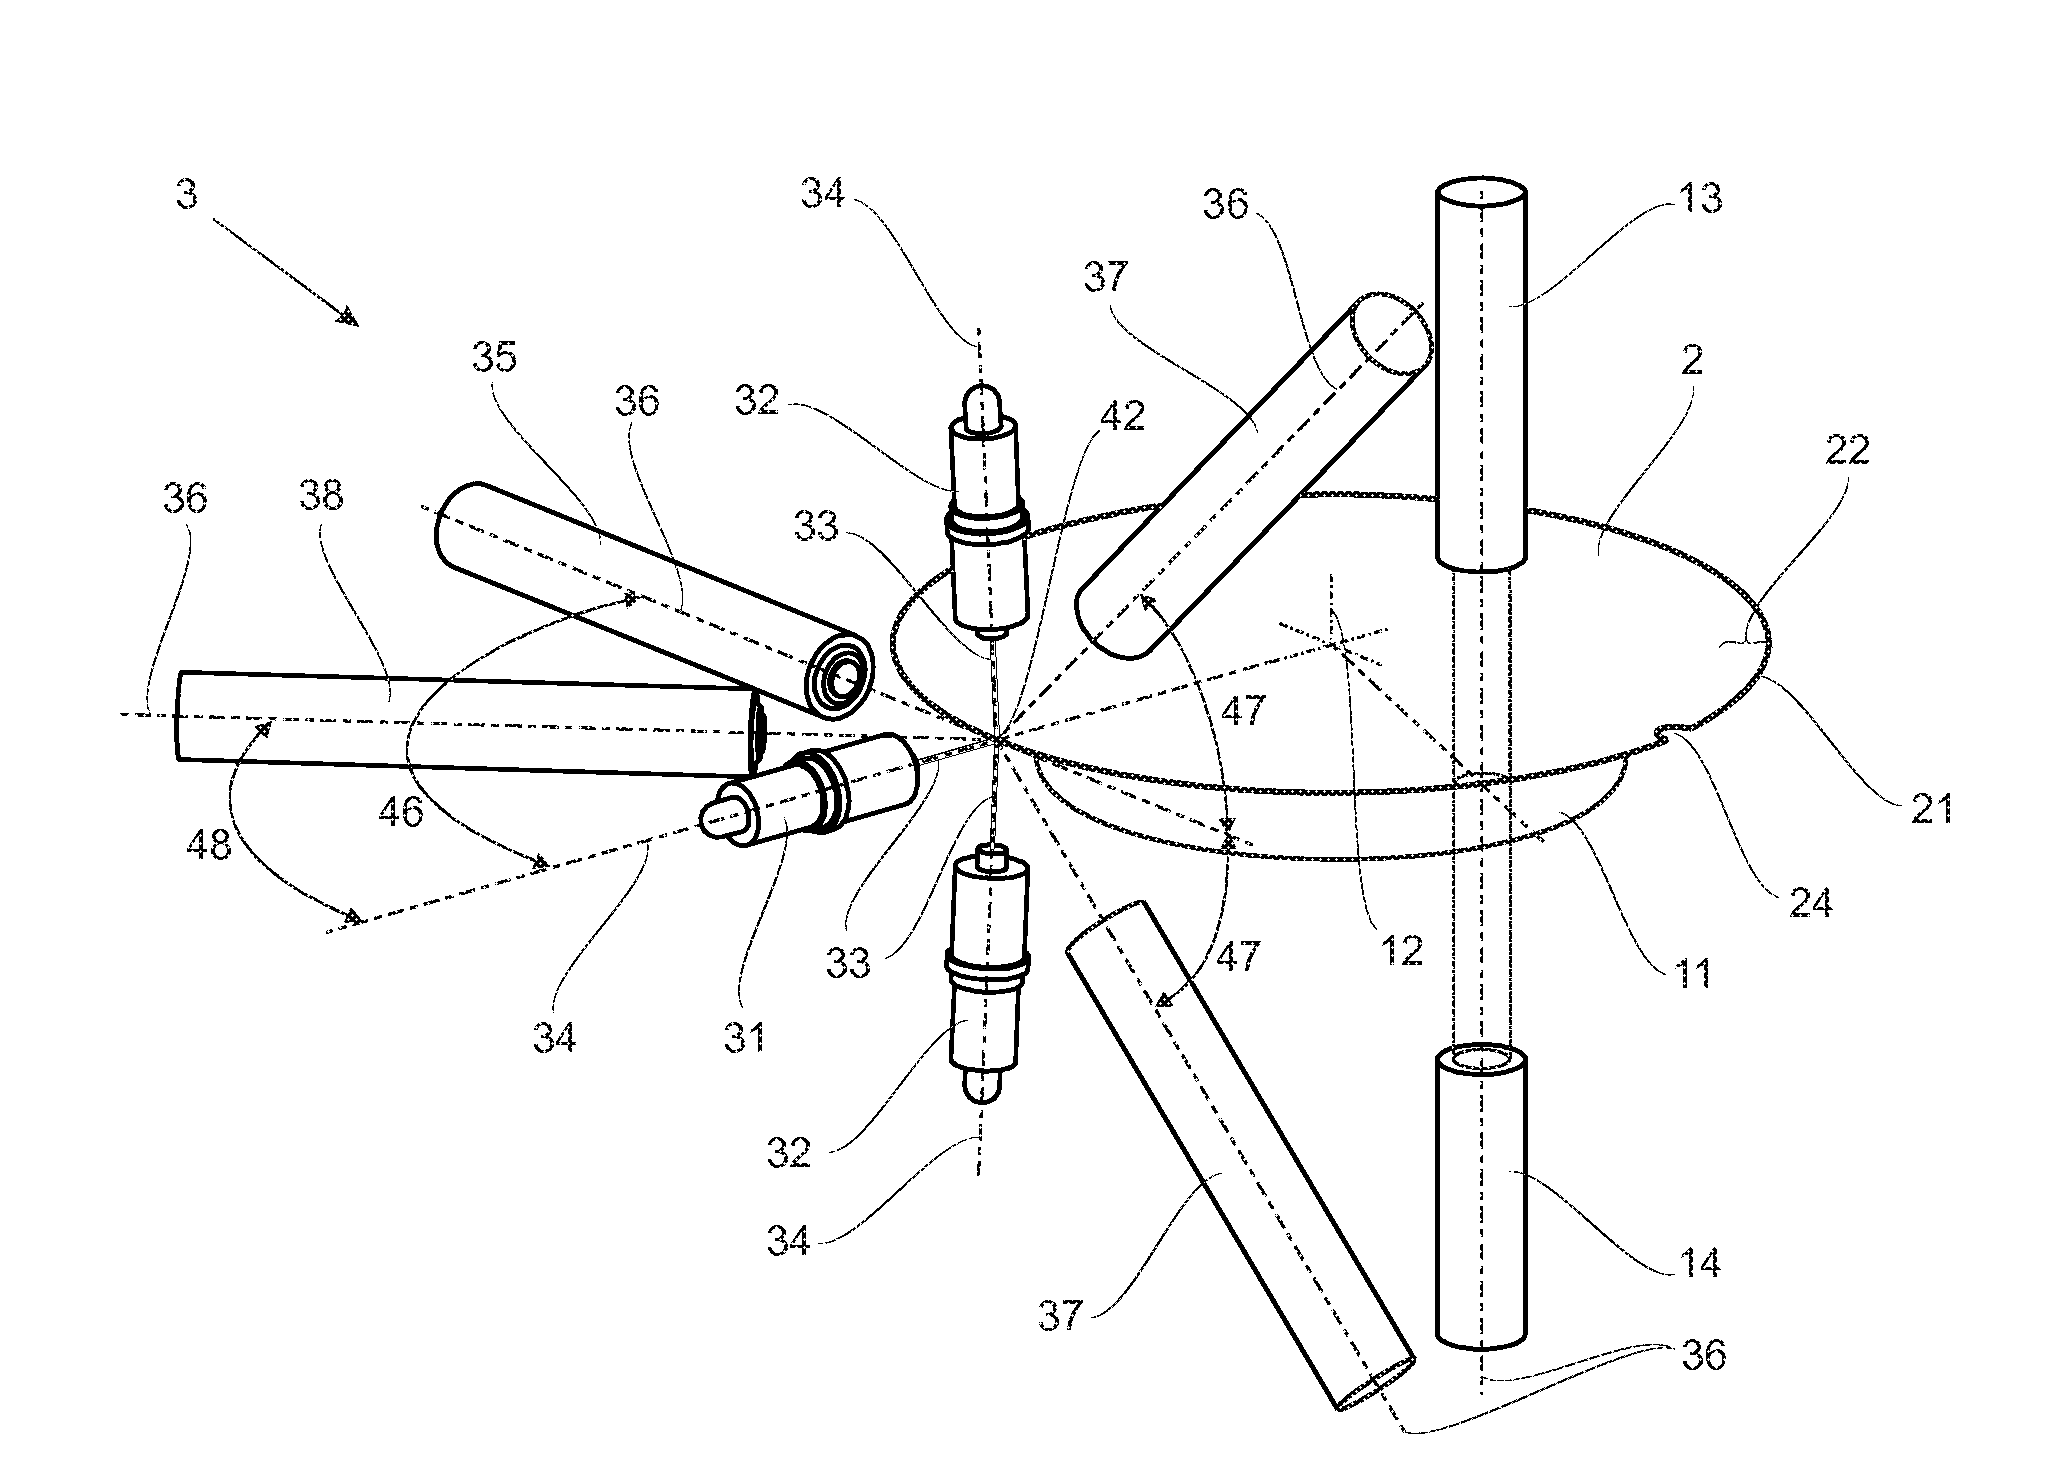 Device for Noncontact Determination of Edge Profile at a Thin Disk-Shaped Object